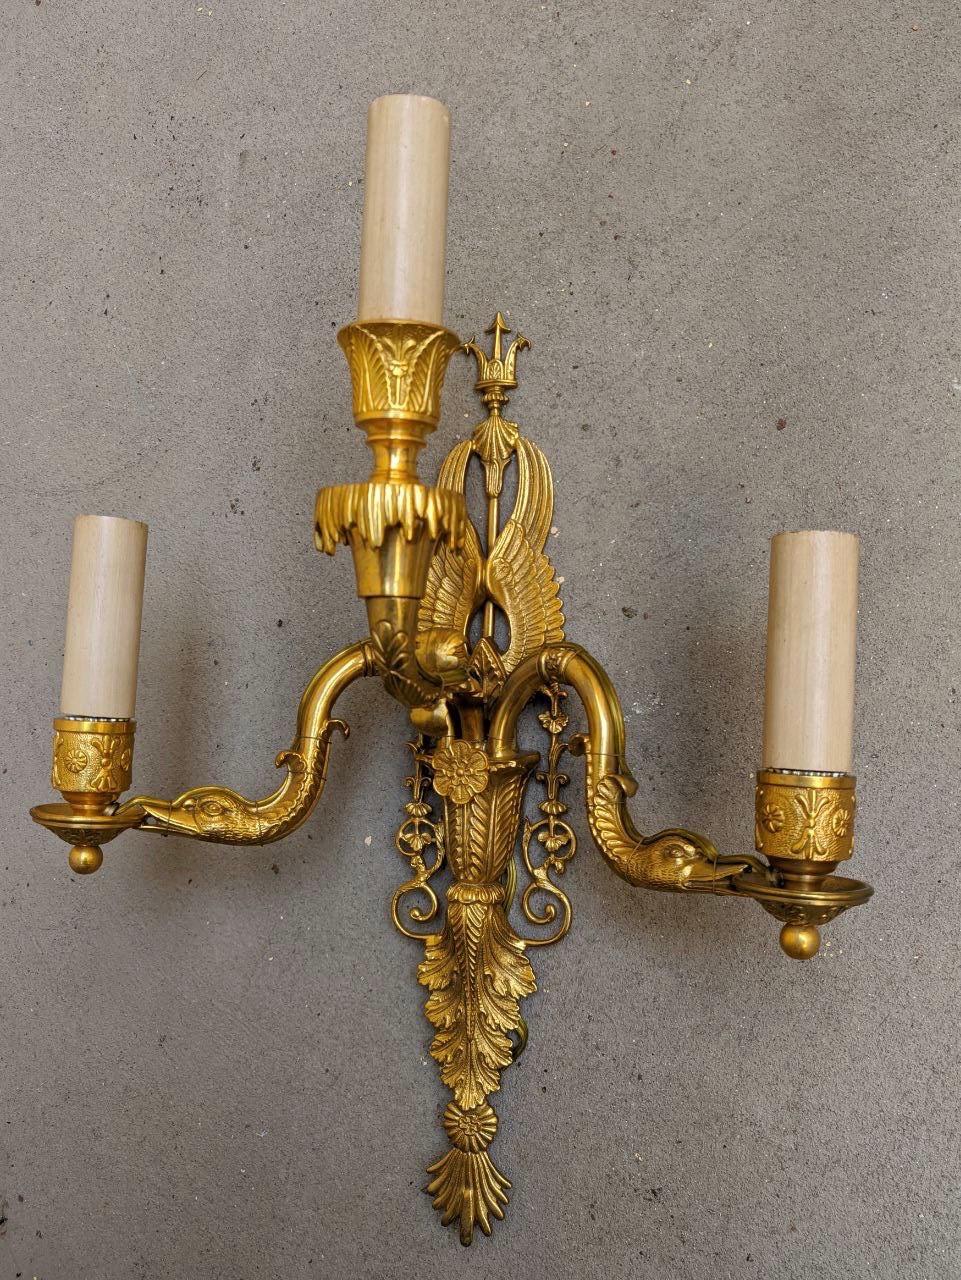 This French Directoire style sconce features top-quality chiselled bronze, with many vivid details. On the top of this sconce, there is a trident sided by two swan's wings. The body features a vegetal decoration with leaves and geometric